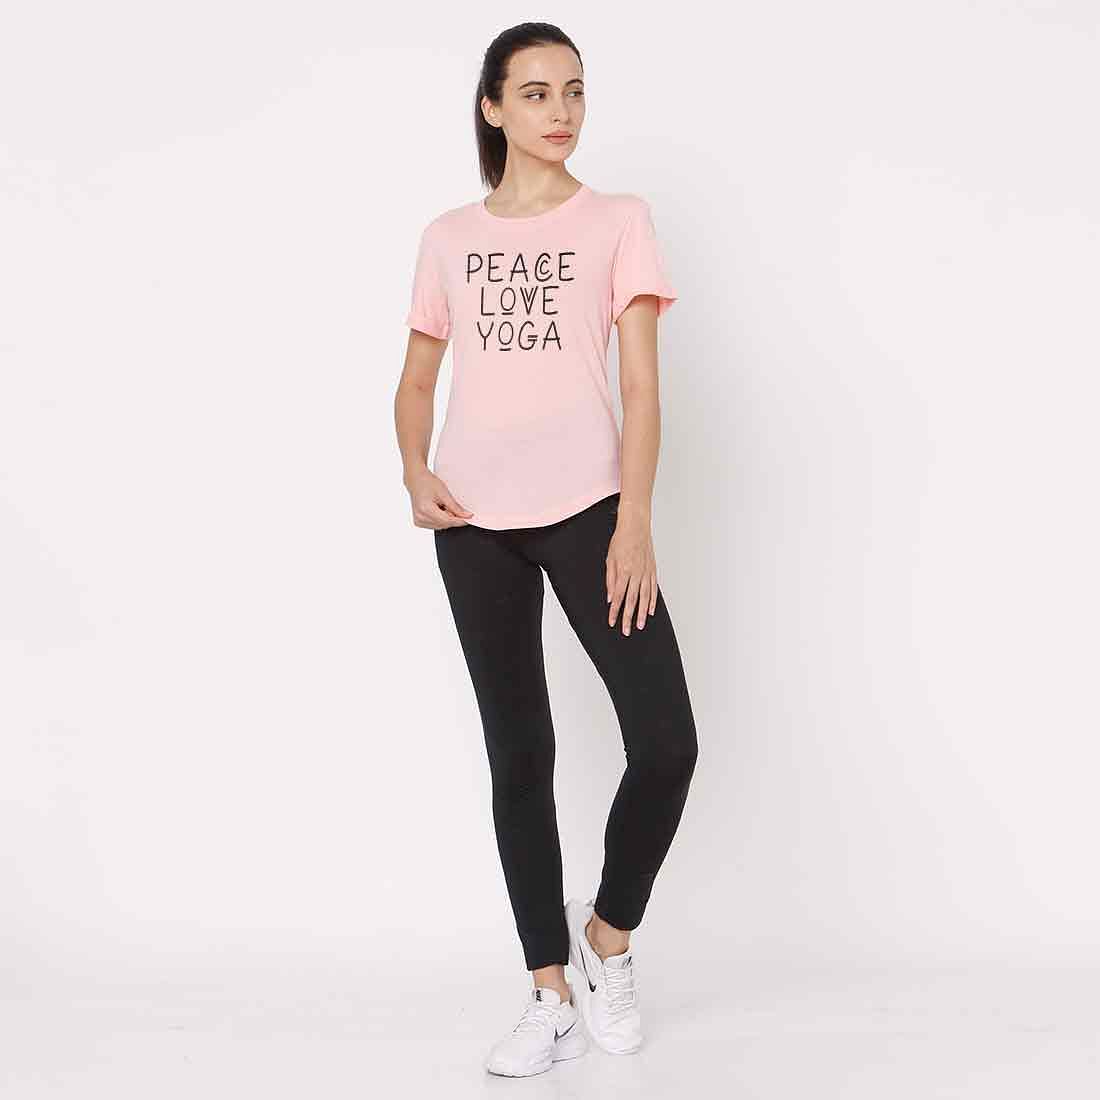 Nutcase yoga t shirts for women stretchable Online India